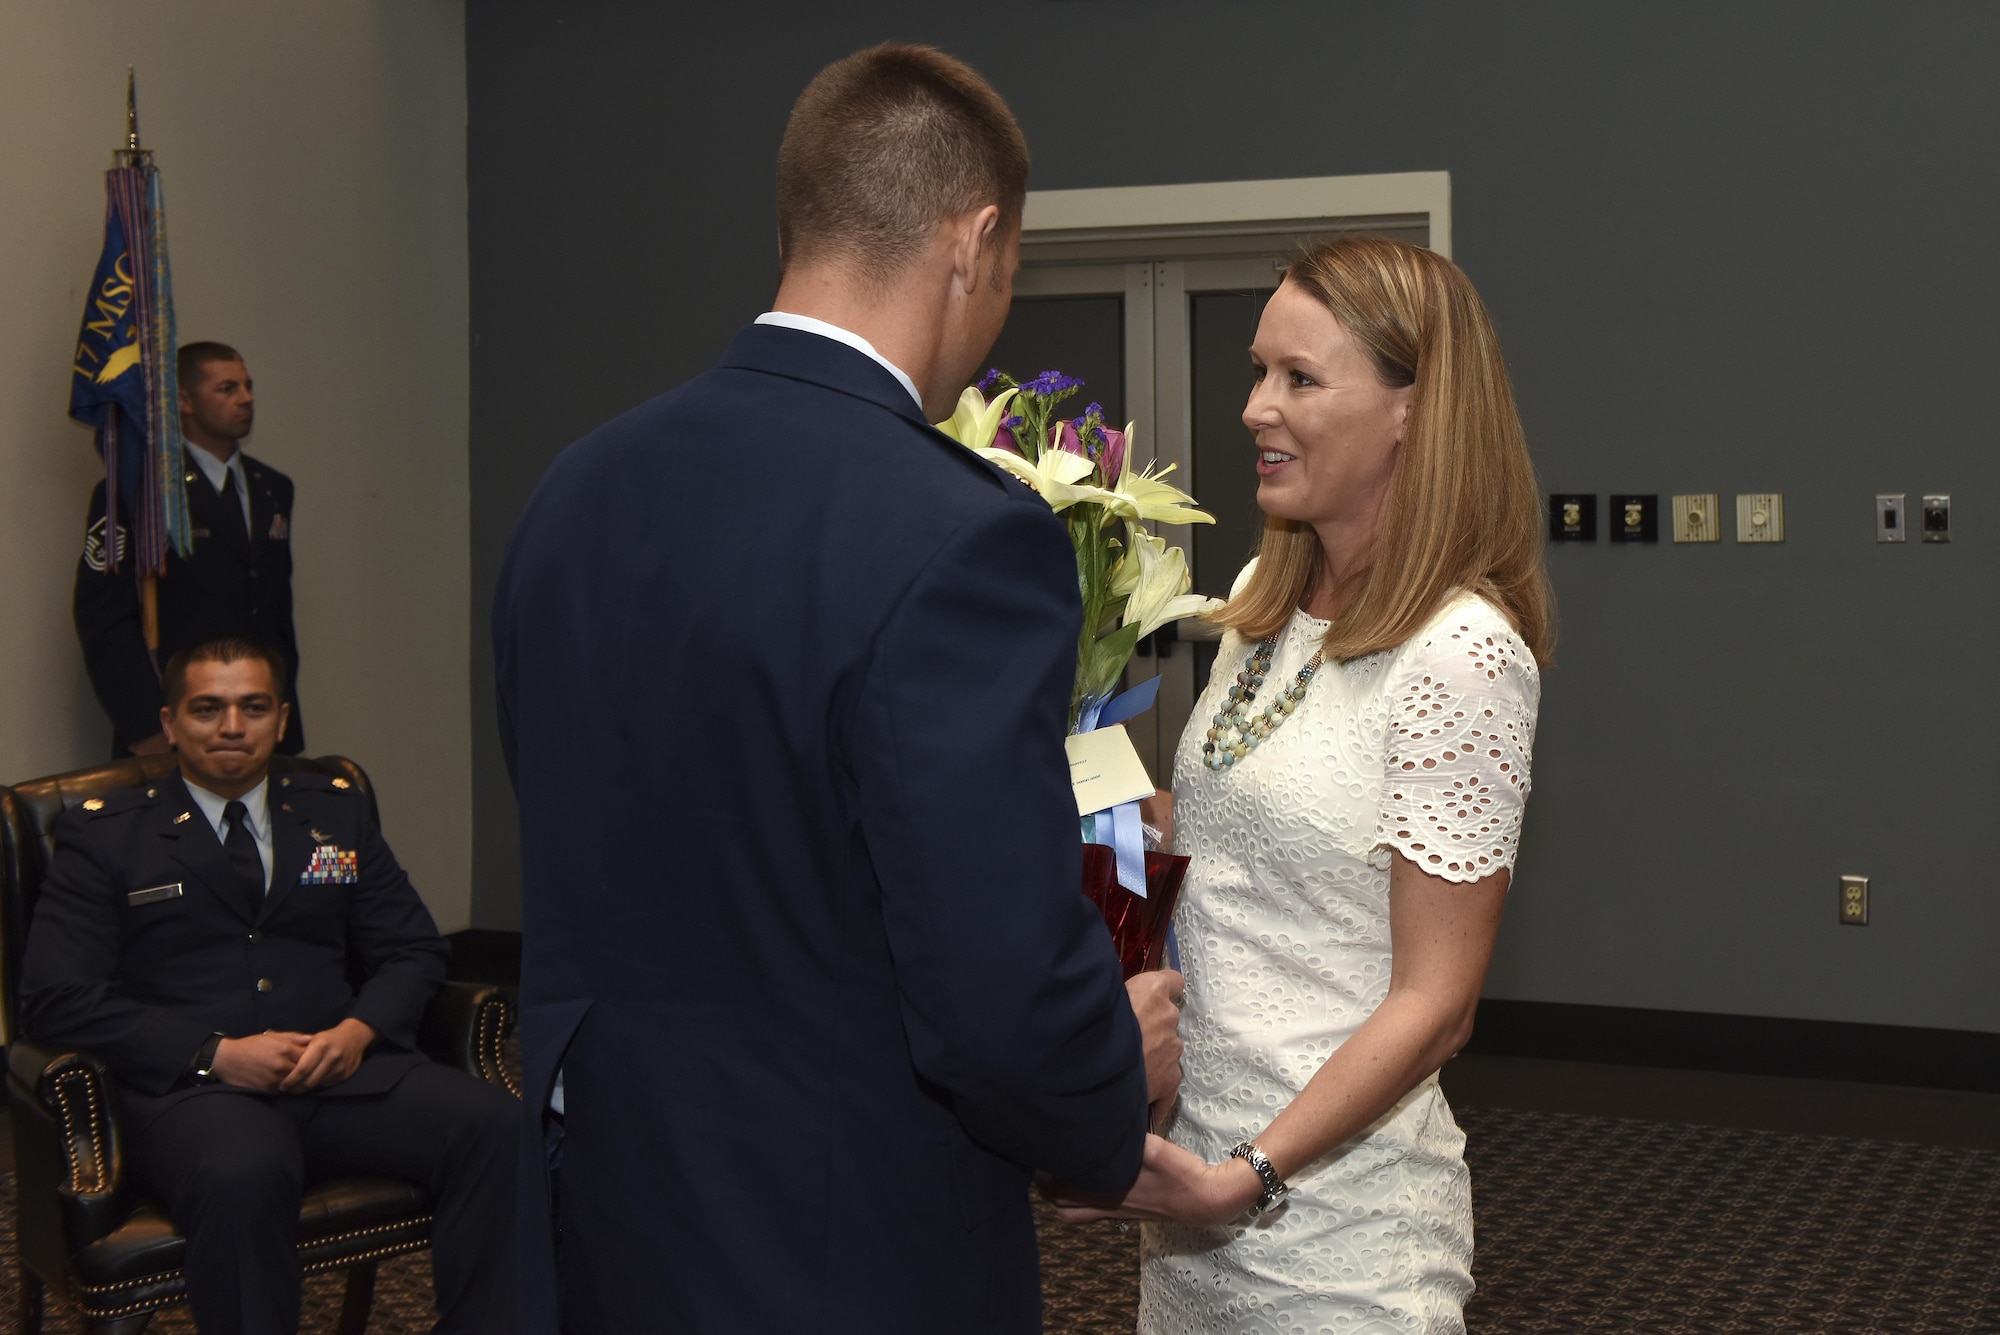 U.S. Air Force Maj. Stephen Maddox, 17th Communications Squadron commander, hands flowers to his wife during the 17th CS change of command ceremony at the Event Center on Goodfellow Air Force Base, Texas, May 31, 2017. During change of command ceremonies it’s custom to give flowers to a departing commander’s wife as a symbol of appreciation for their support.